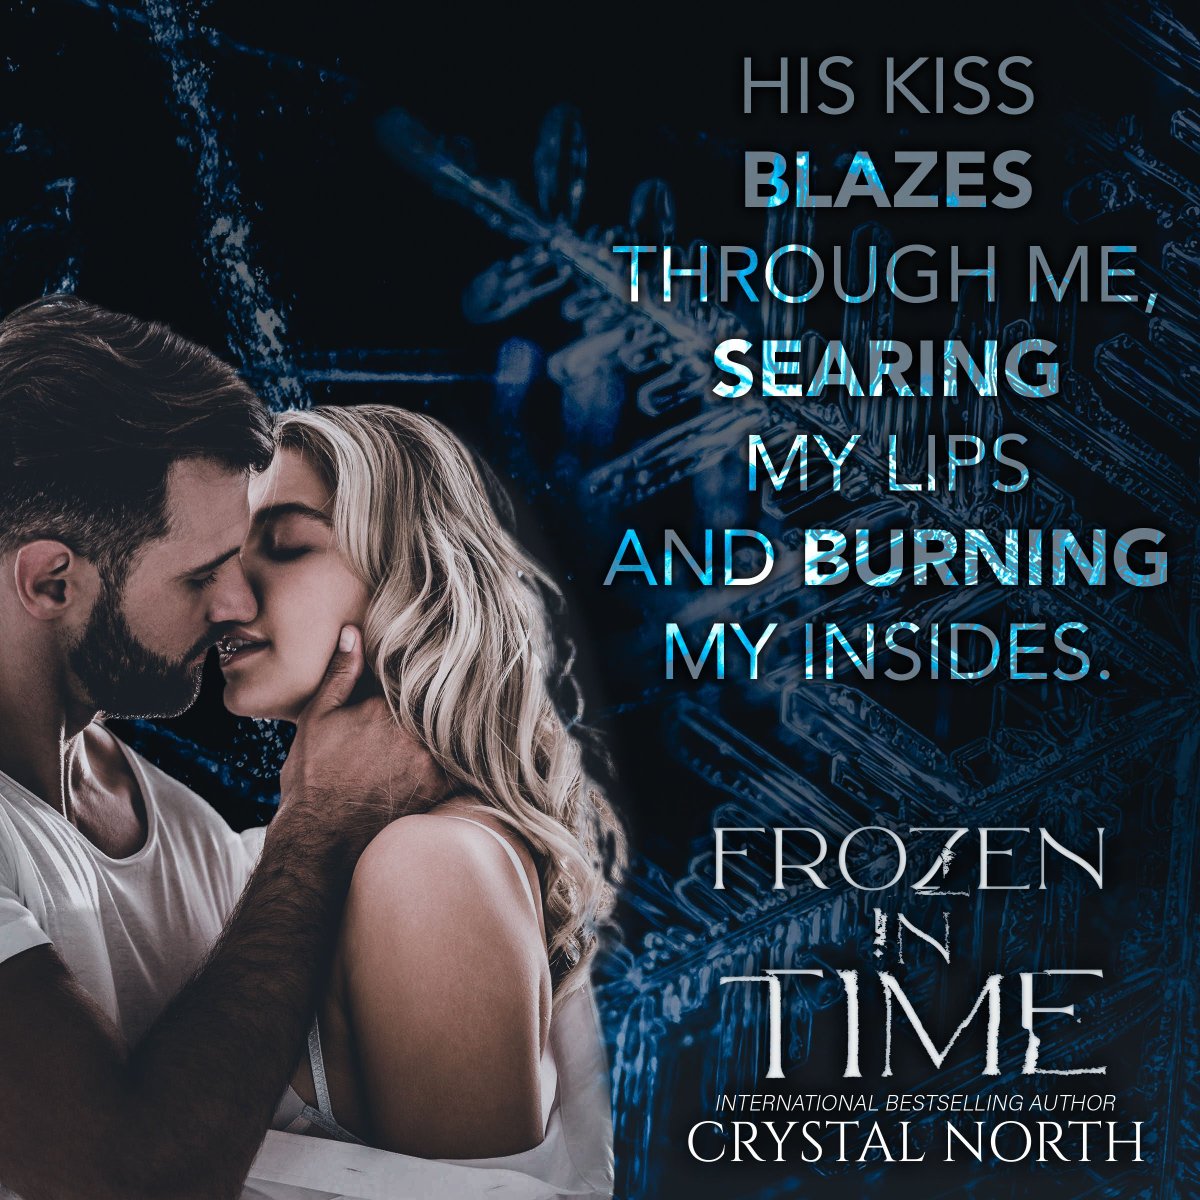 Frozen in Time by Crystal North is #Rereleasing April 25th with new content added! Get frost bit by this why choose Norse Gods tale!

#SignUpToday: geni.us/fimevents

#Paranormal #WhyChoose #BroodyHeroes #TouchHerandDie #GrumpySunshine @Chaotic_Creativ